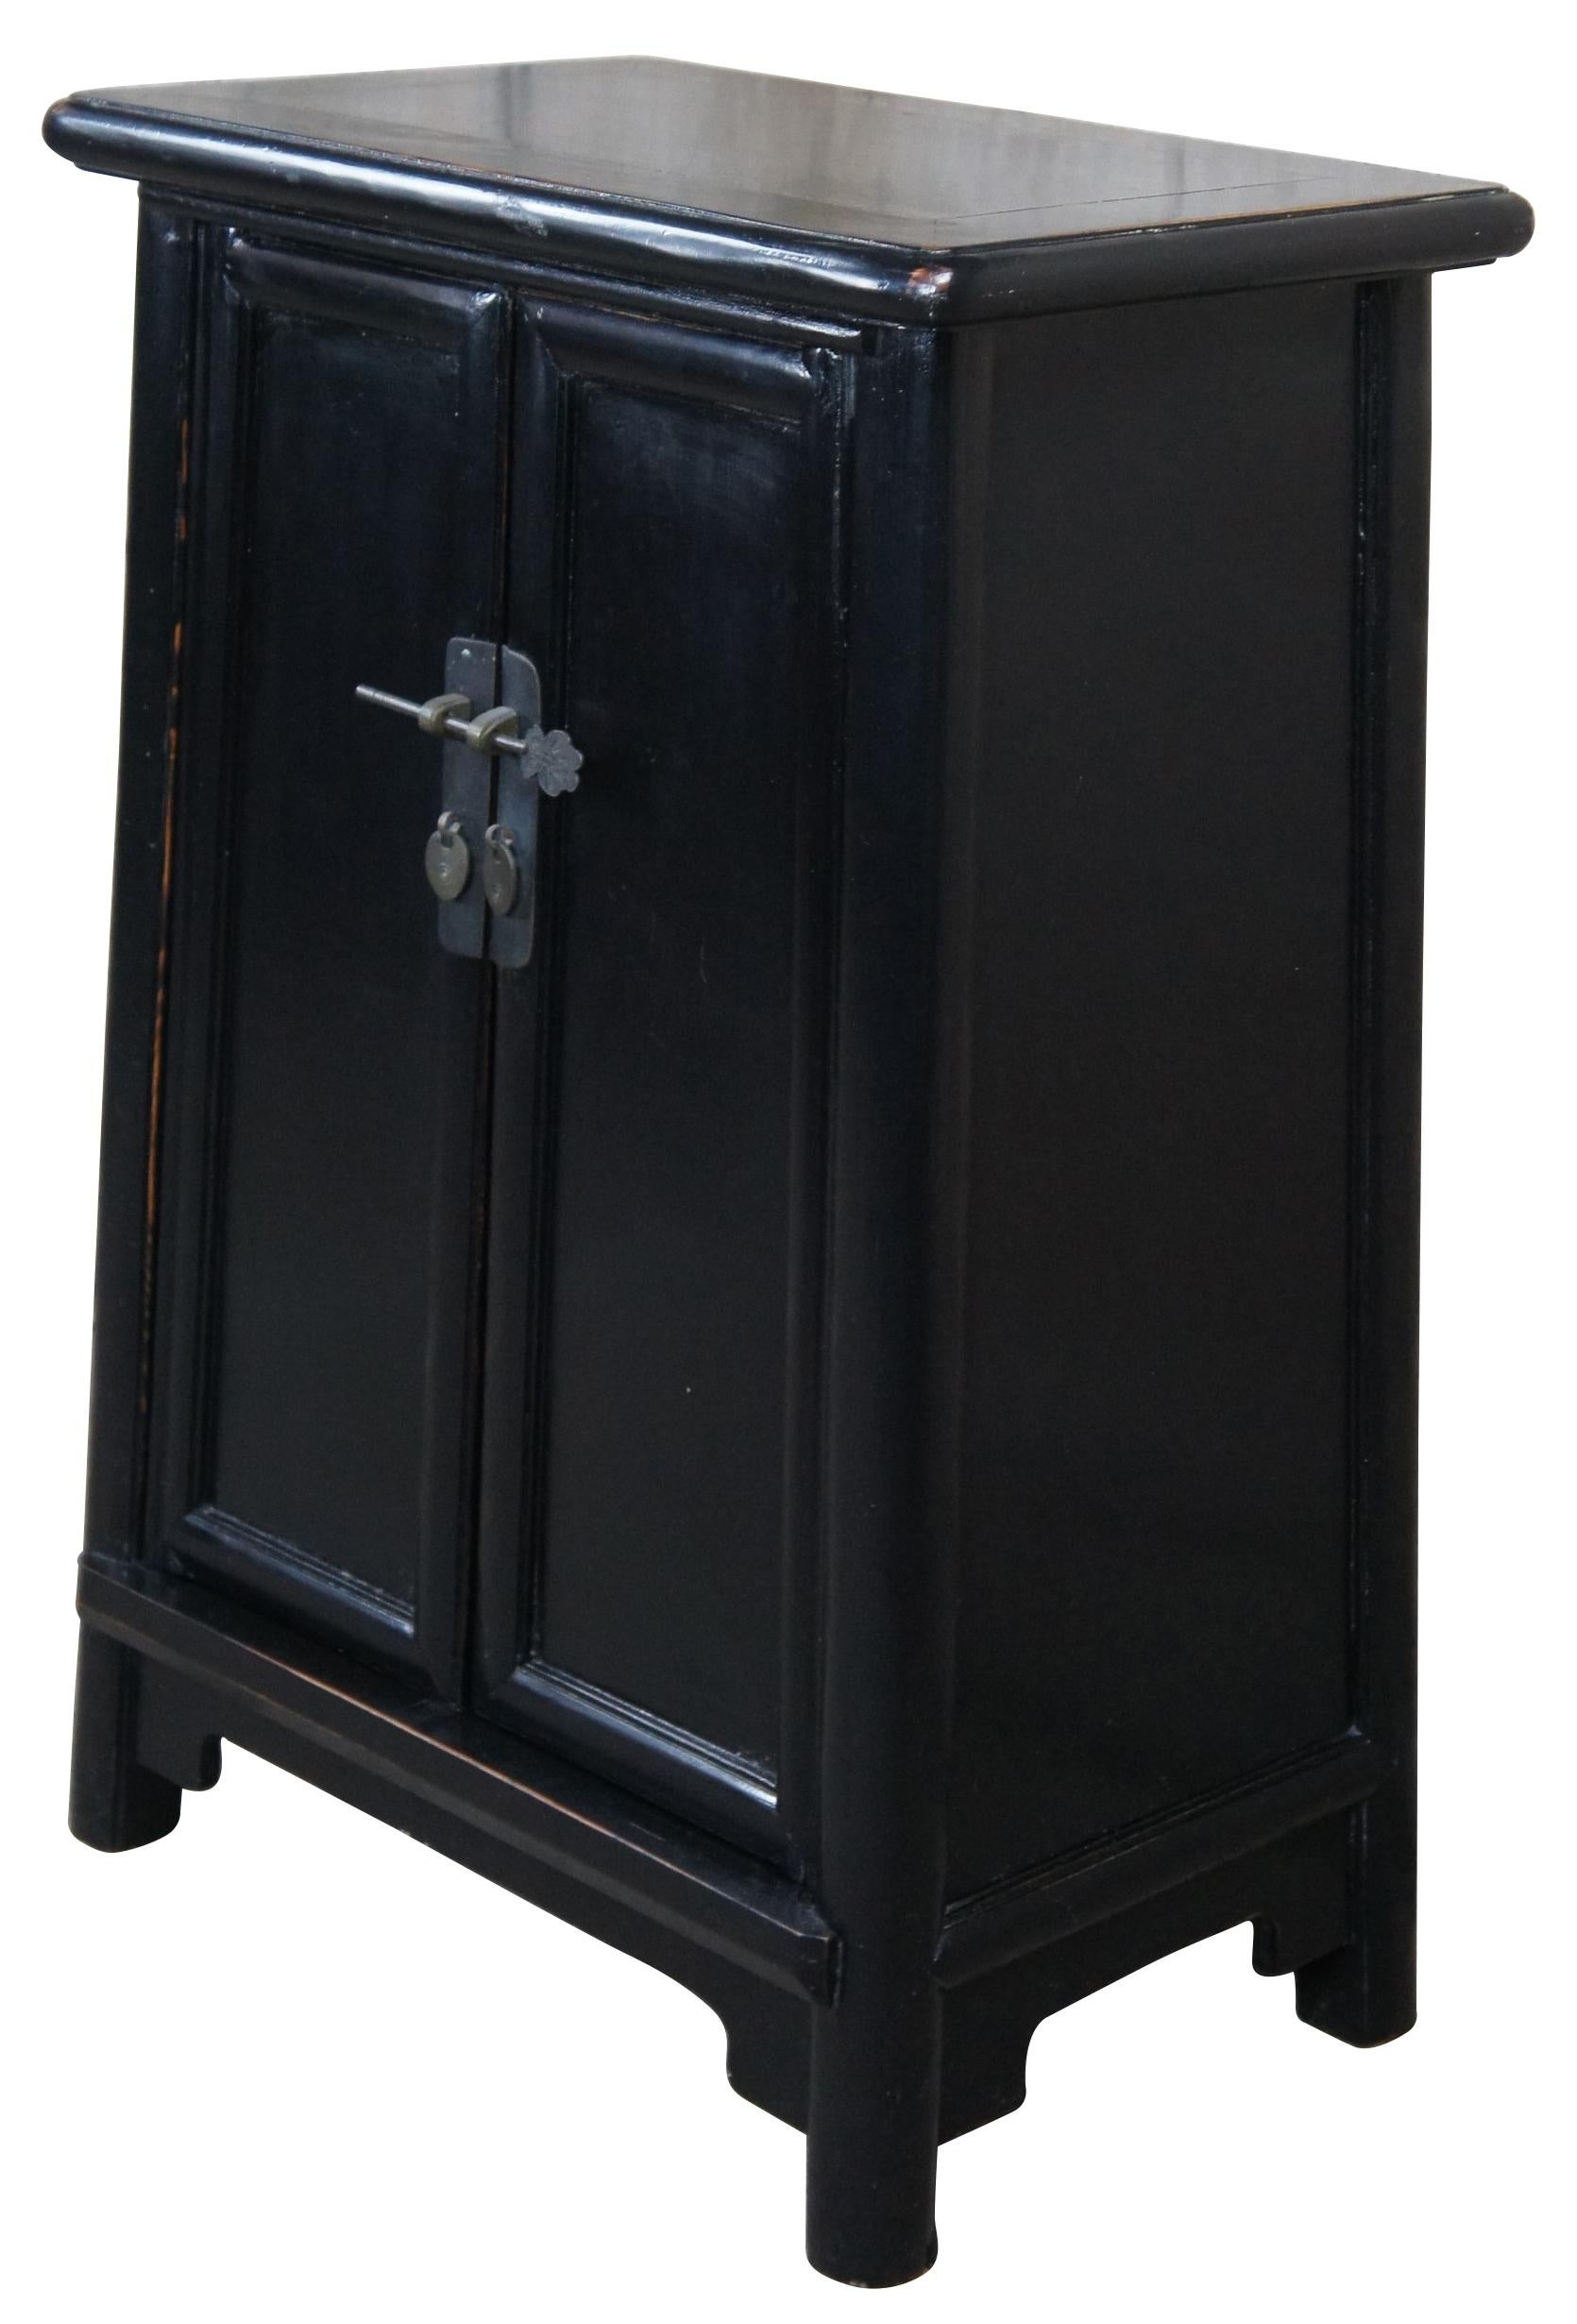 Late 20th Century black lacquer elm altar storage cabinet, bedside table or console.  Traditional ming style form with 2 doors that open to a divided interior with two drawers.   Great for use in a hallway, entry, bedroom or bathroom.  